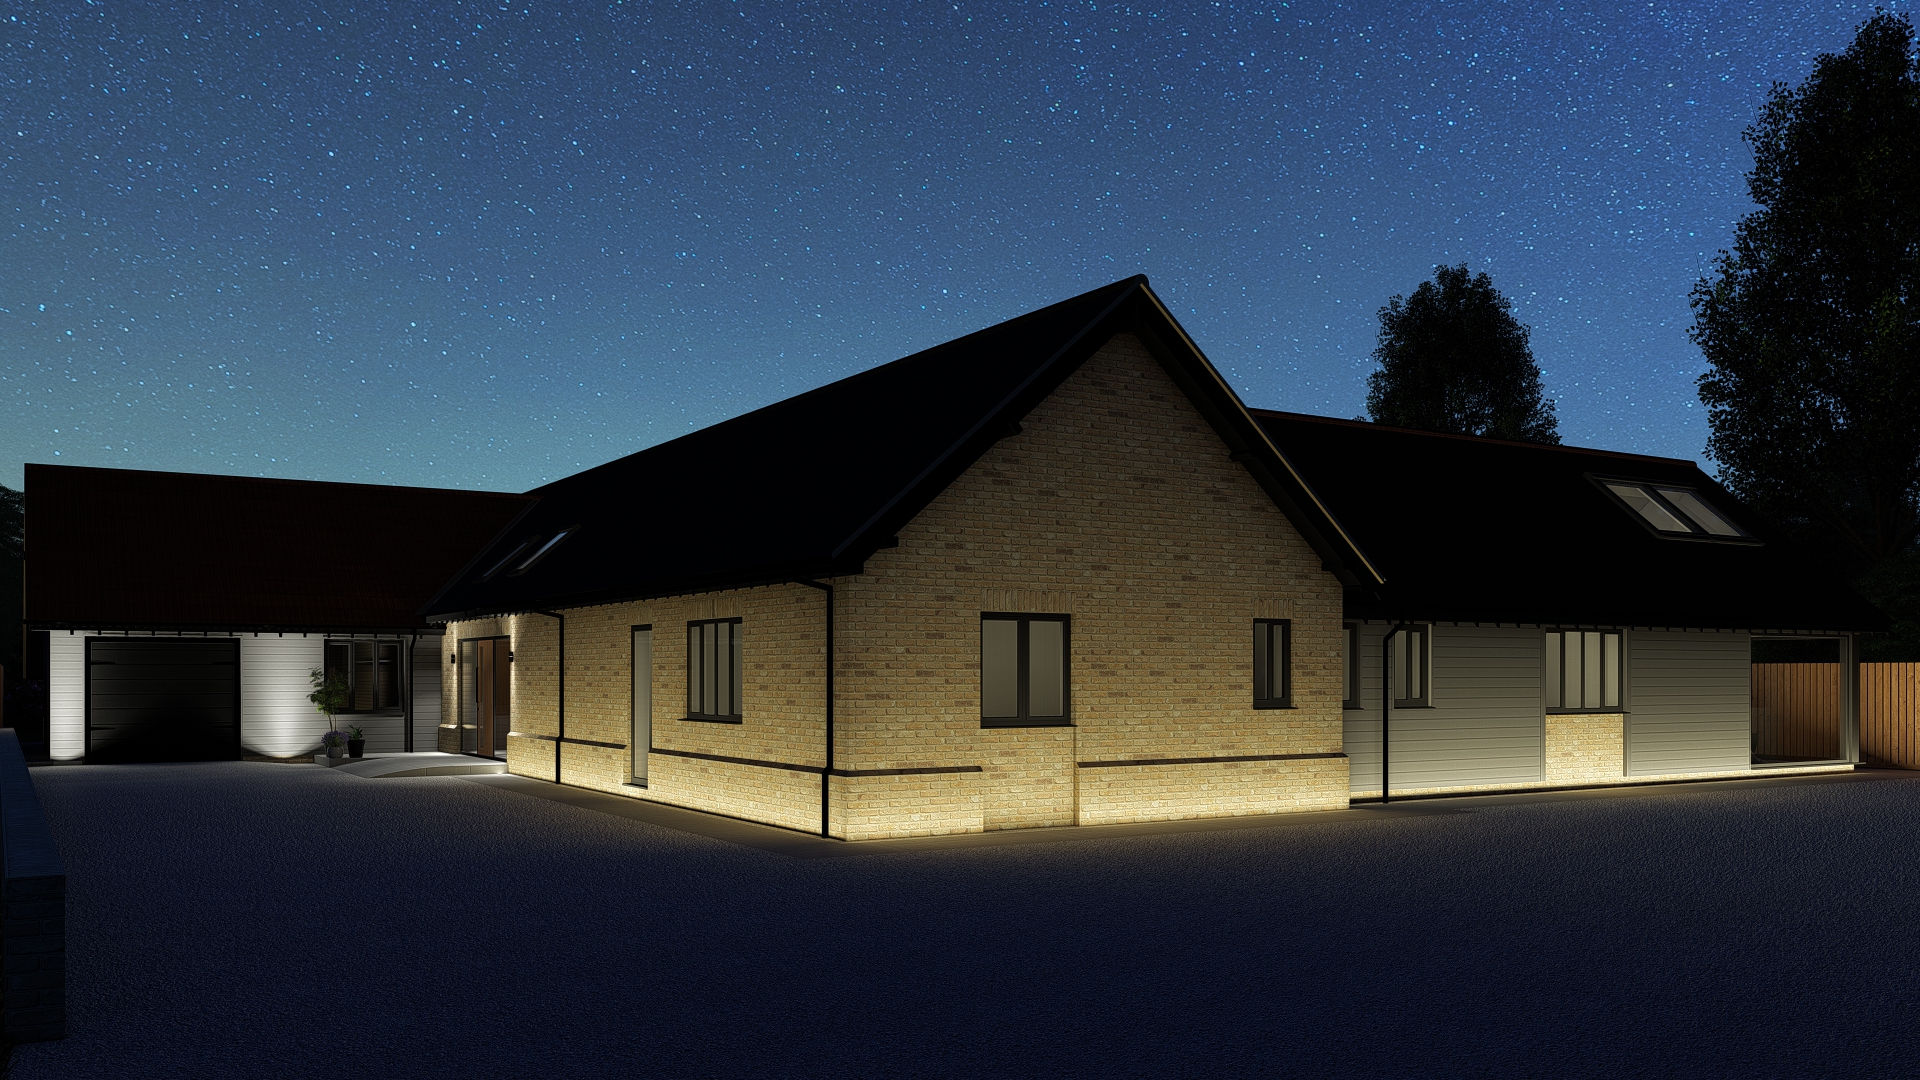 Proposed new dwelling in the style of a barn conversion.